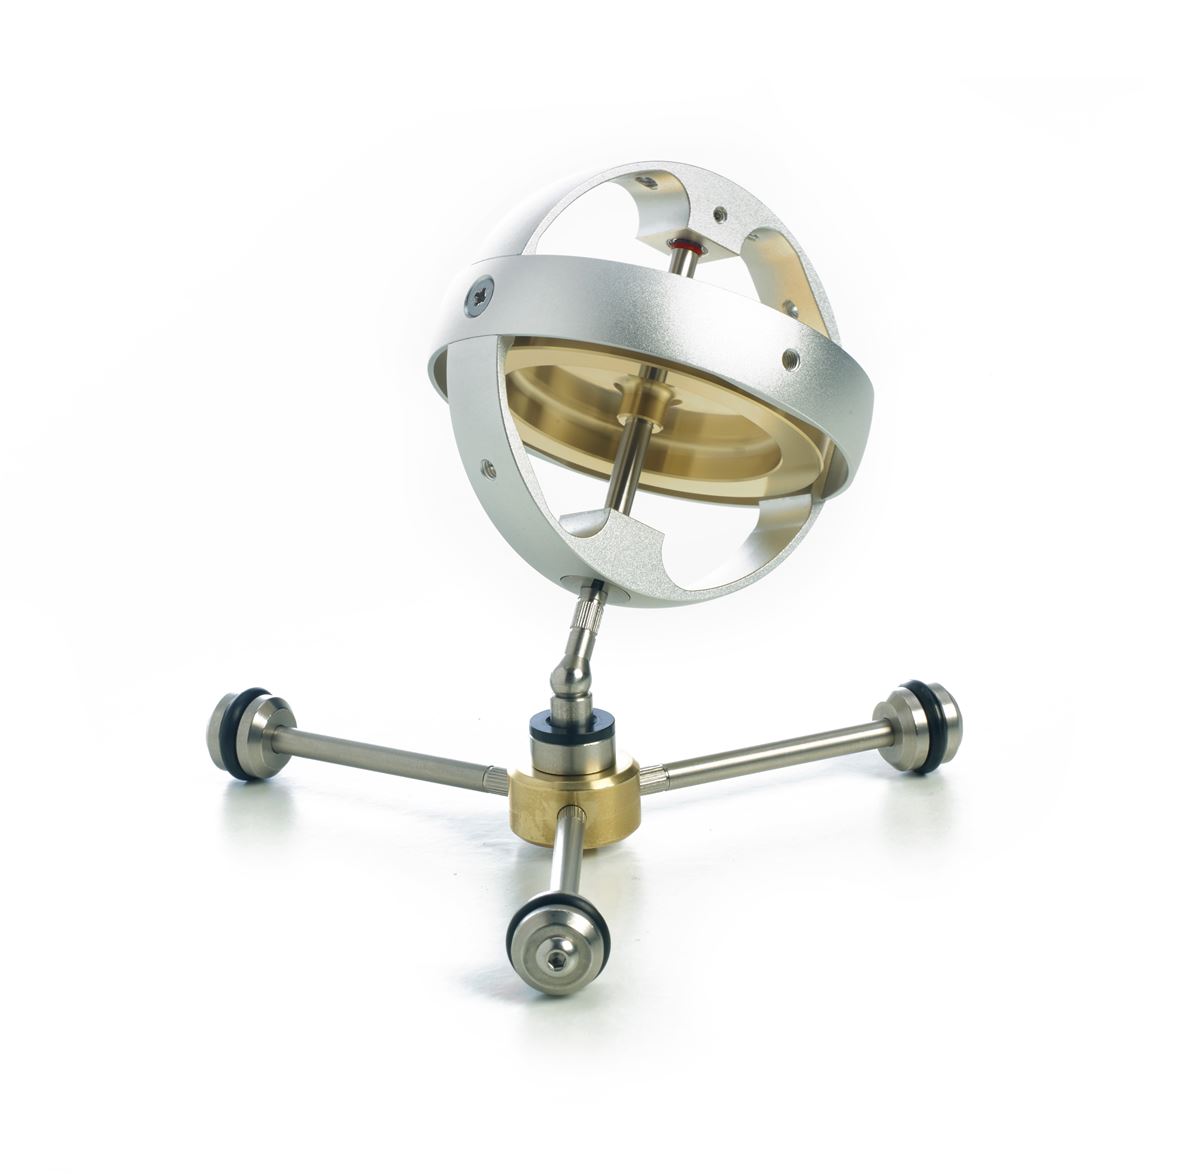 Super Gyroscope Gimbals (add-on kit) - From